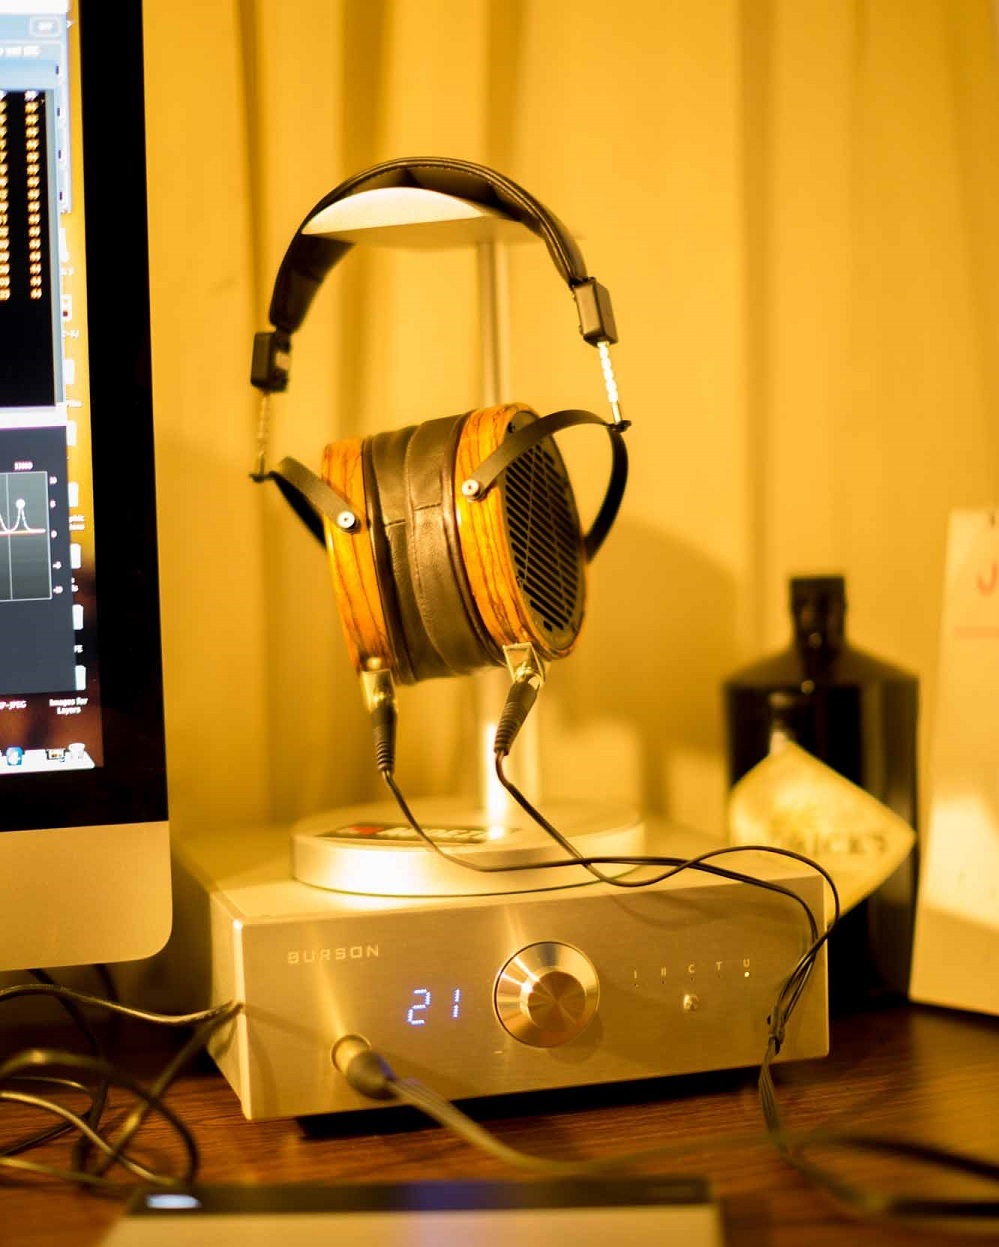 Solid state headphone amplifier for Audeze